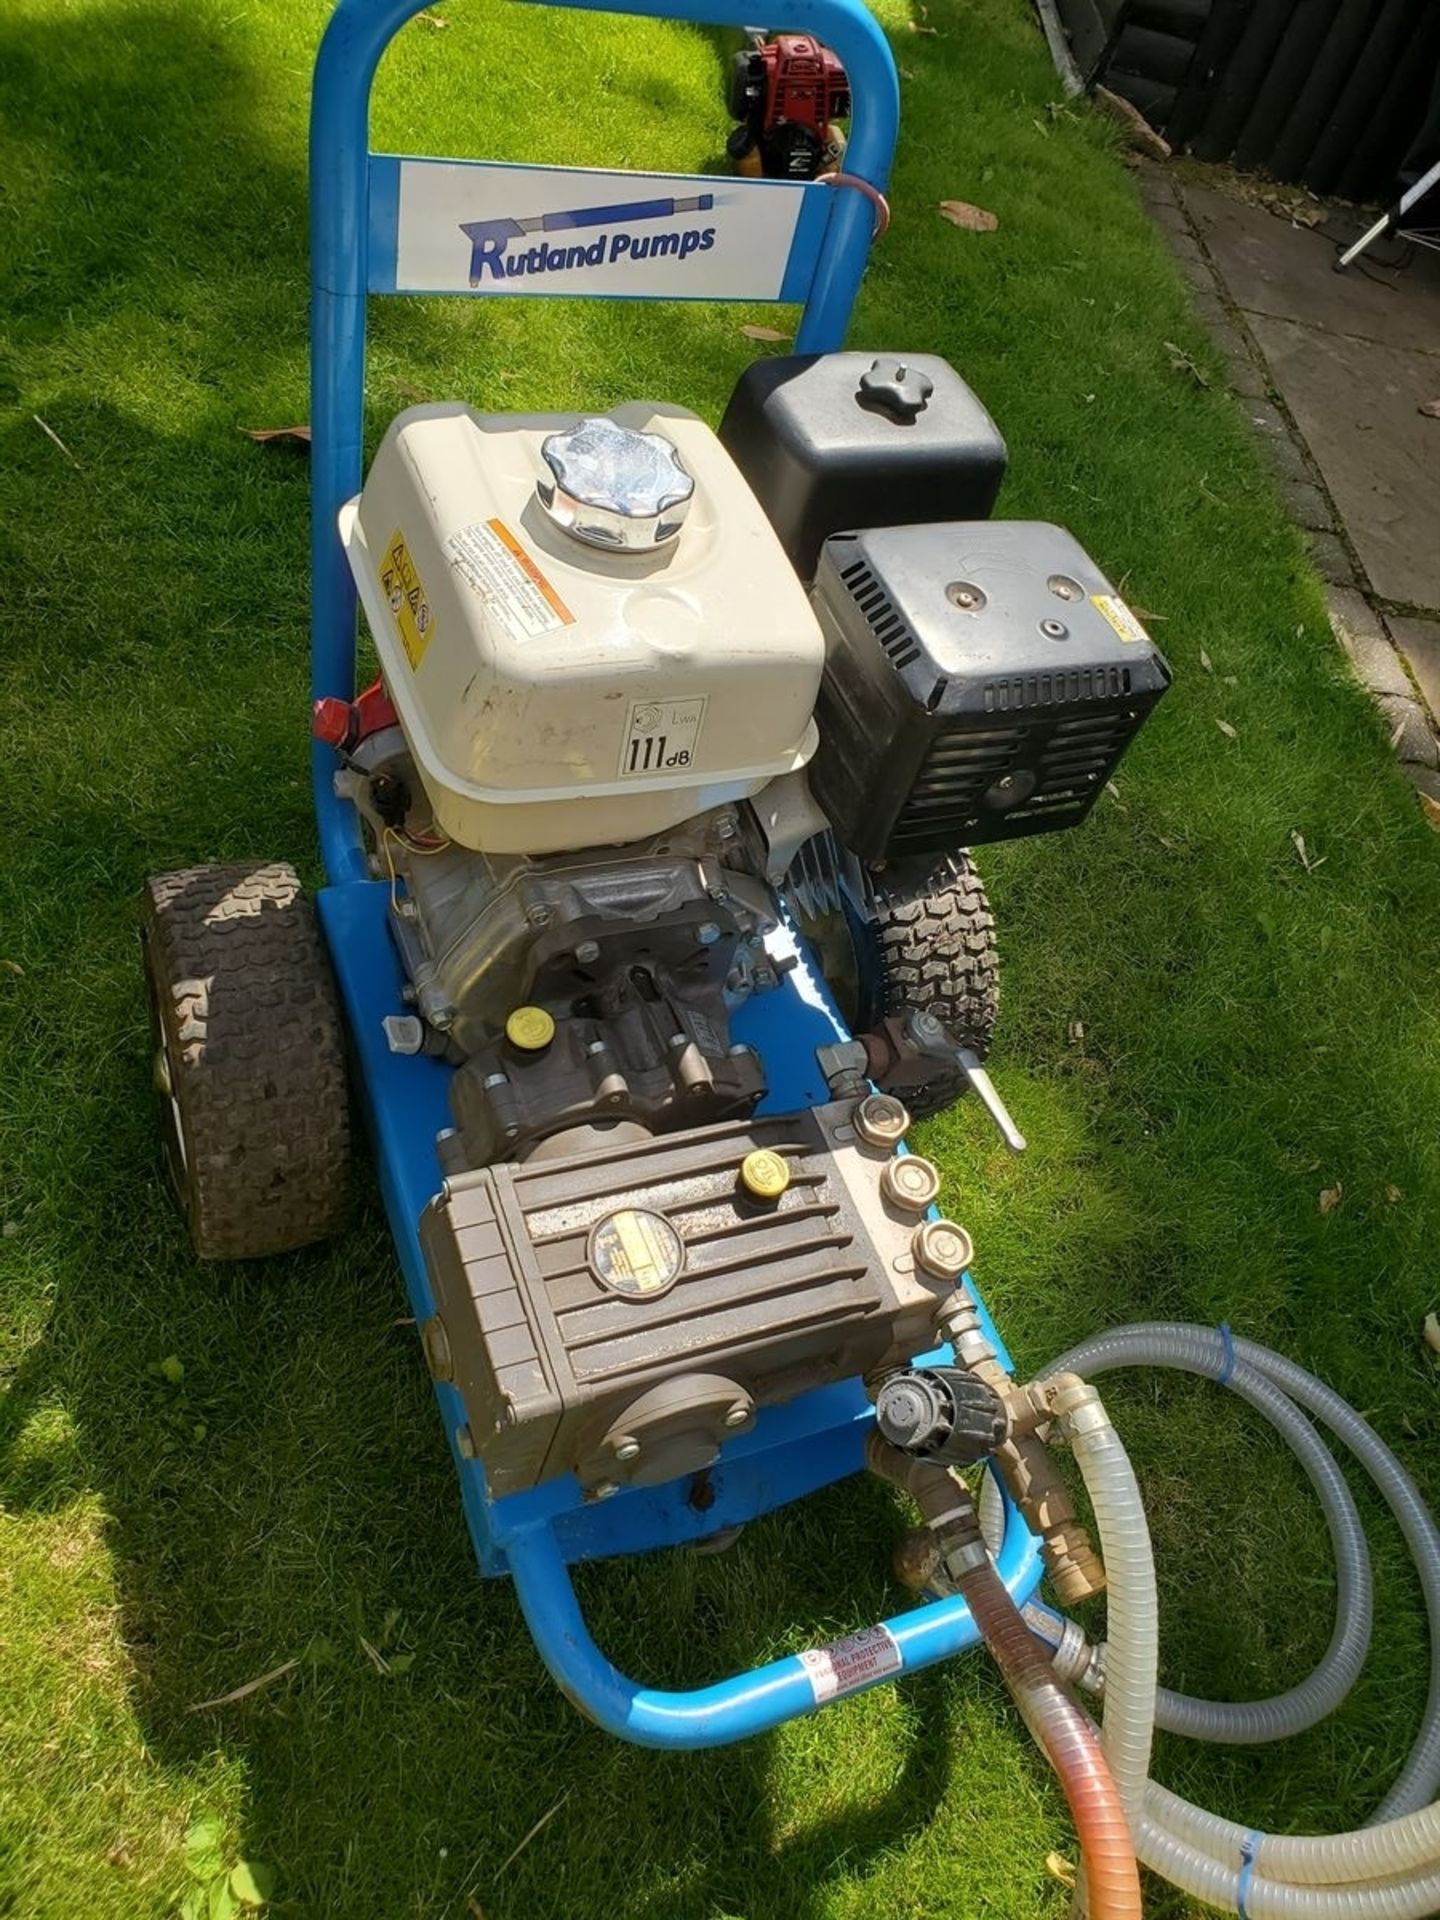 Rutland Pumps Pressure Washer with Pipes